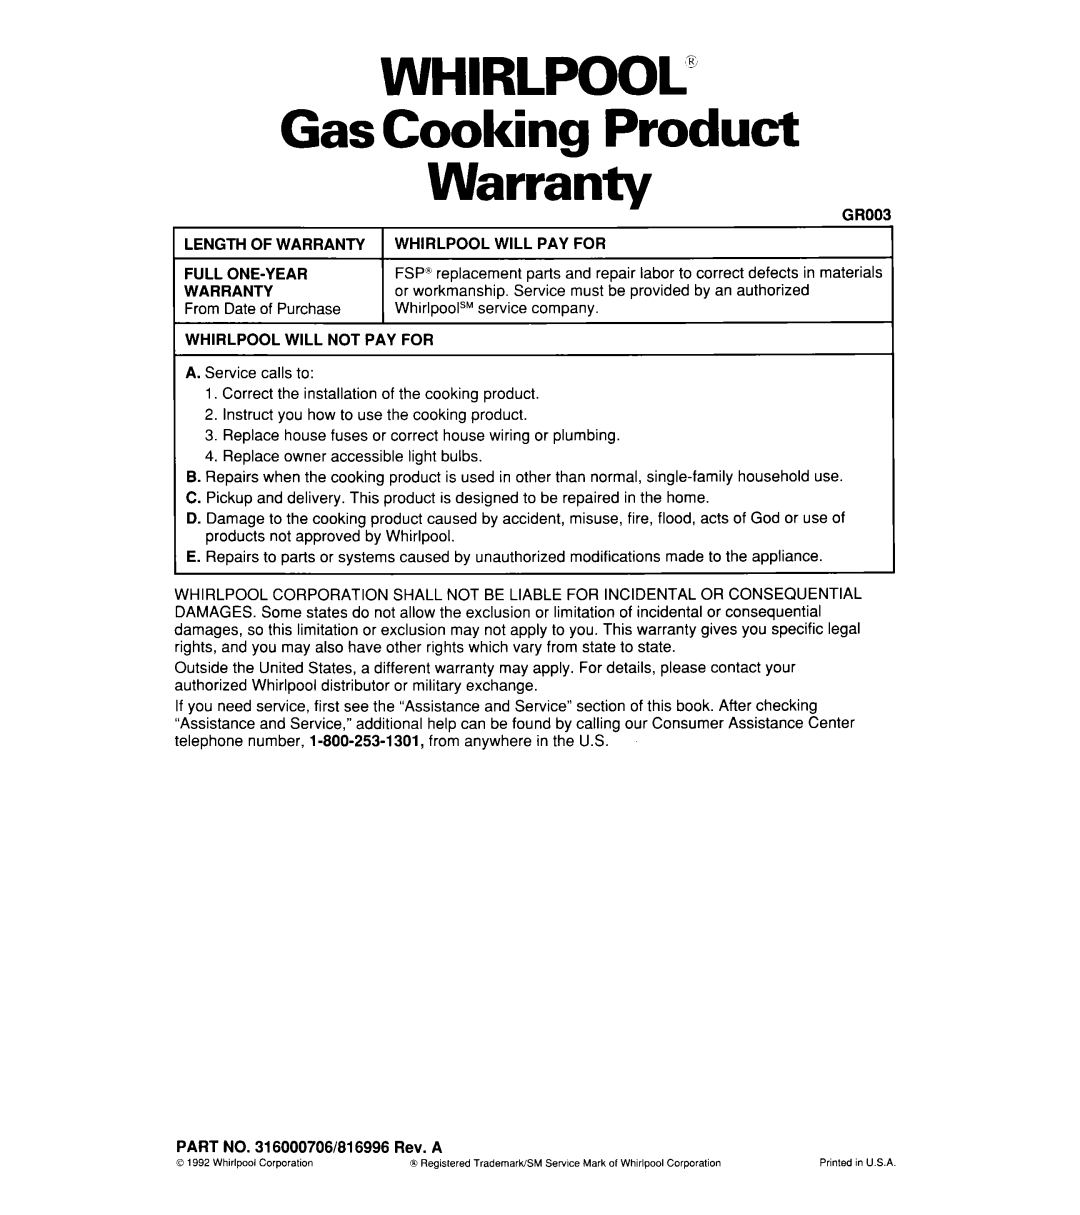 Whirlpool SF302BSY/BEY, SF3000SY/EY, SF304BSY important safety instructions WHIRLPOOL” Gas Cooking Product Warranty 